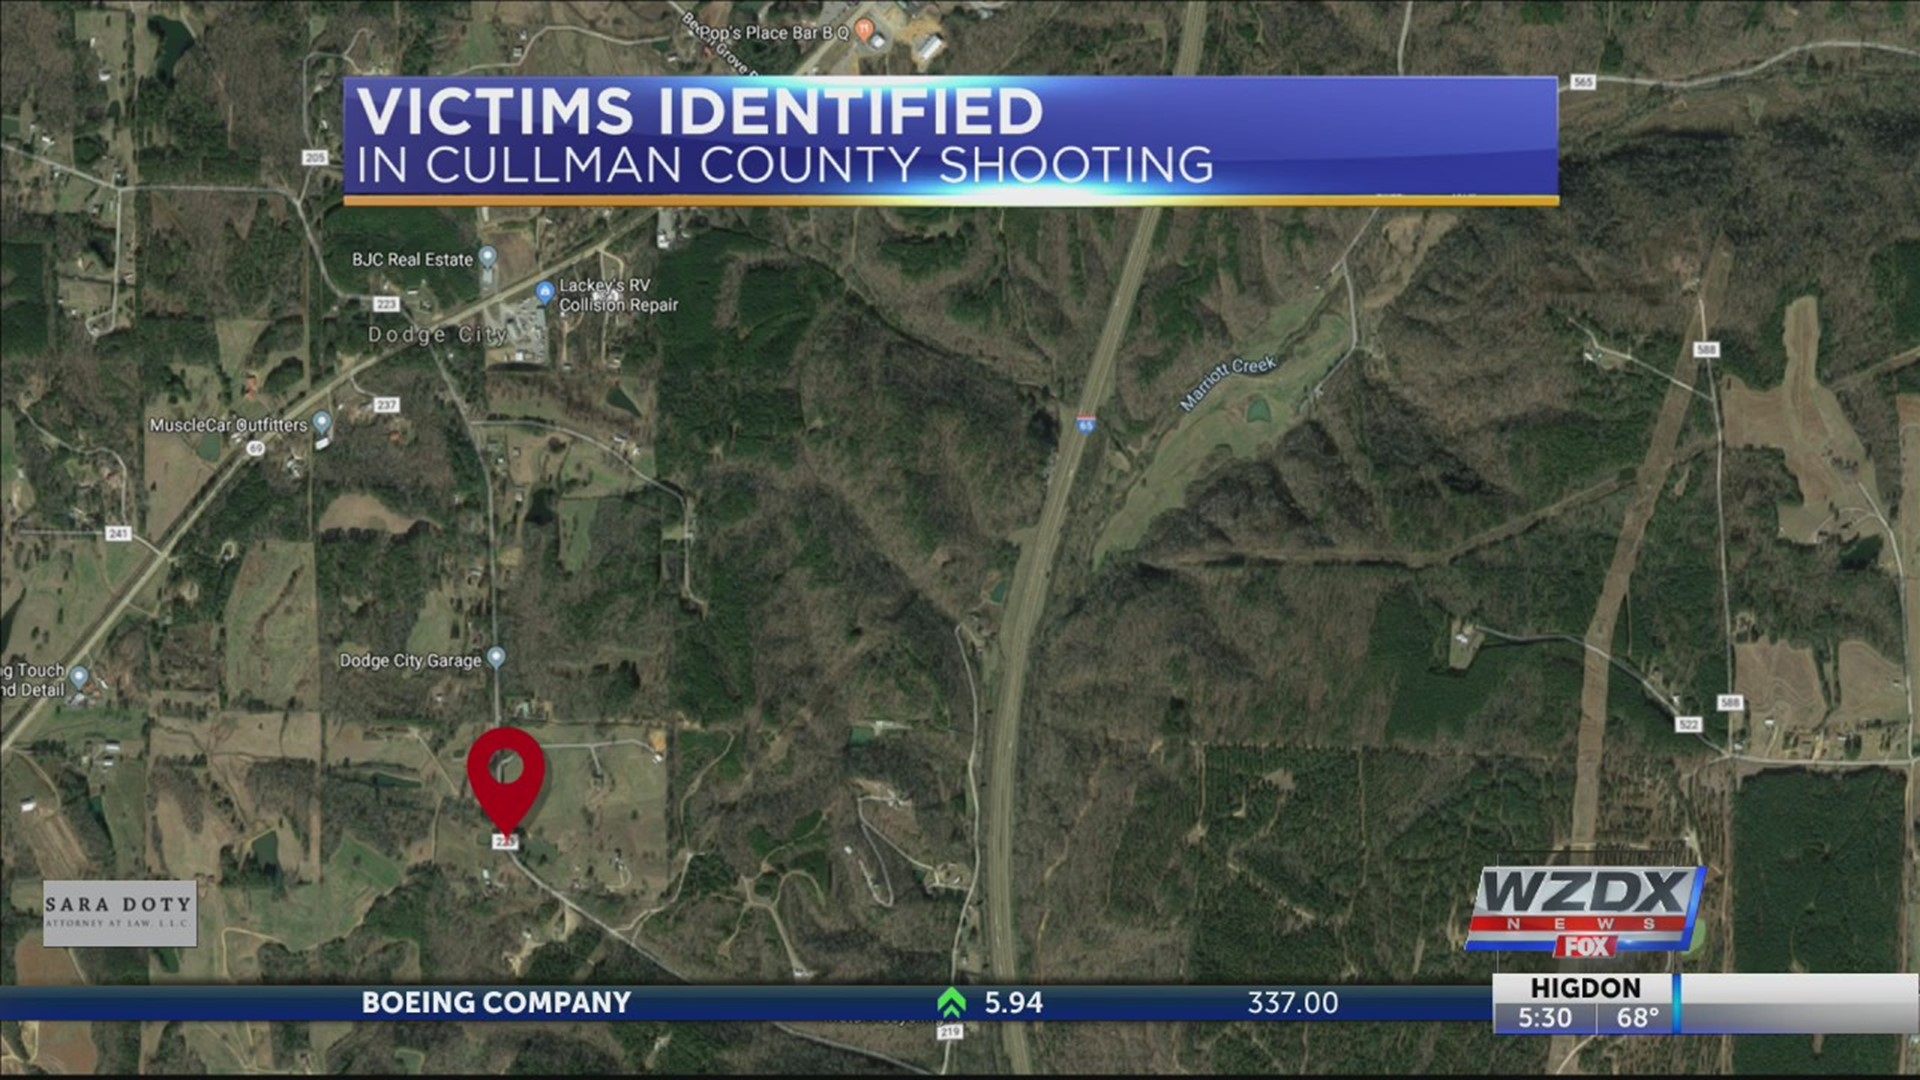 The Cullman County Sheriff's Office has released the names of Monday's shooting victims.